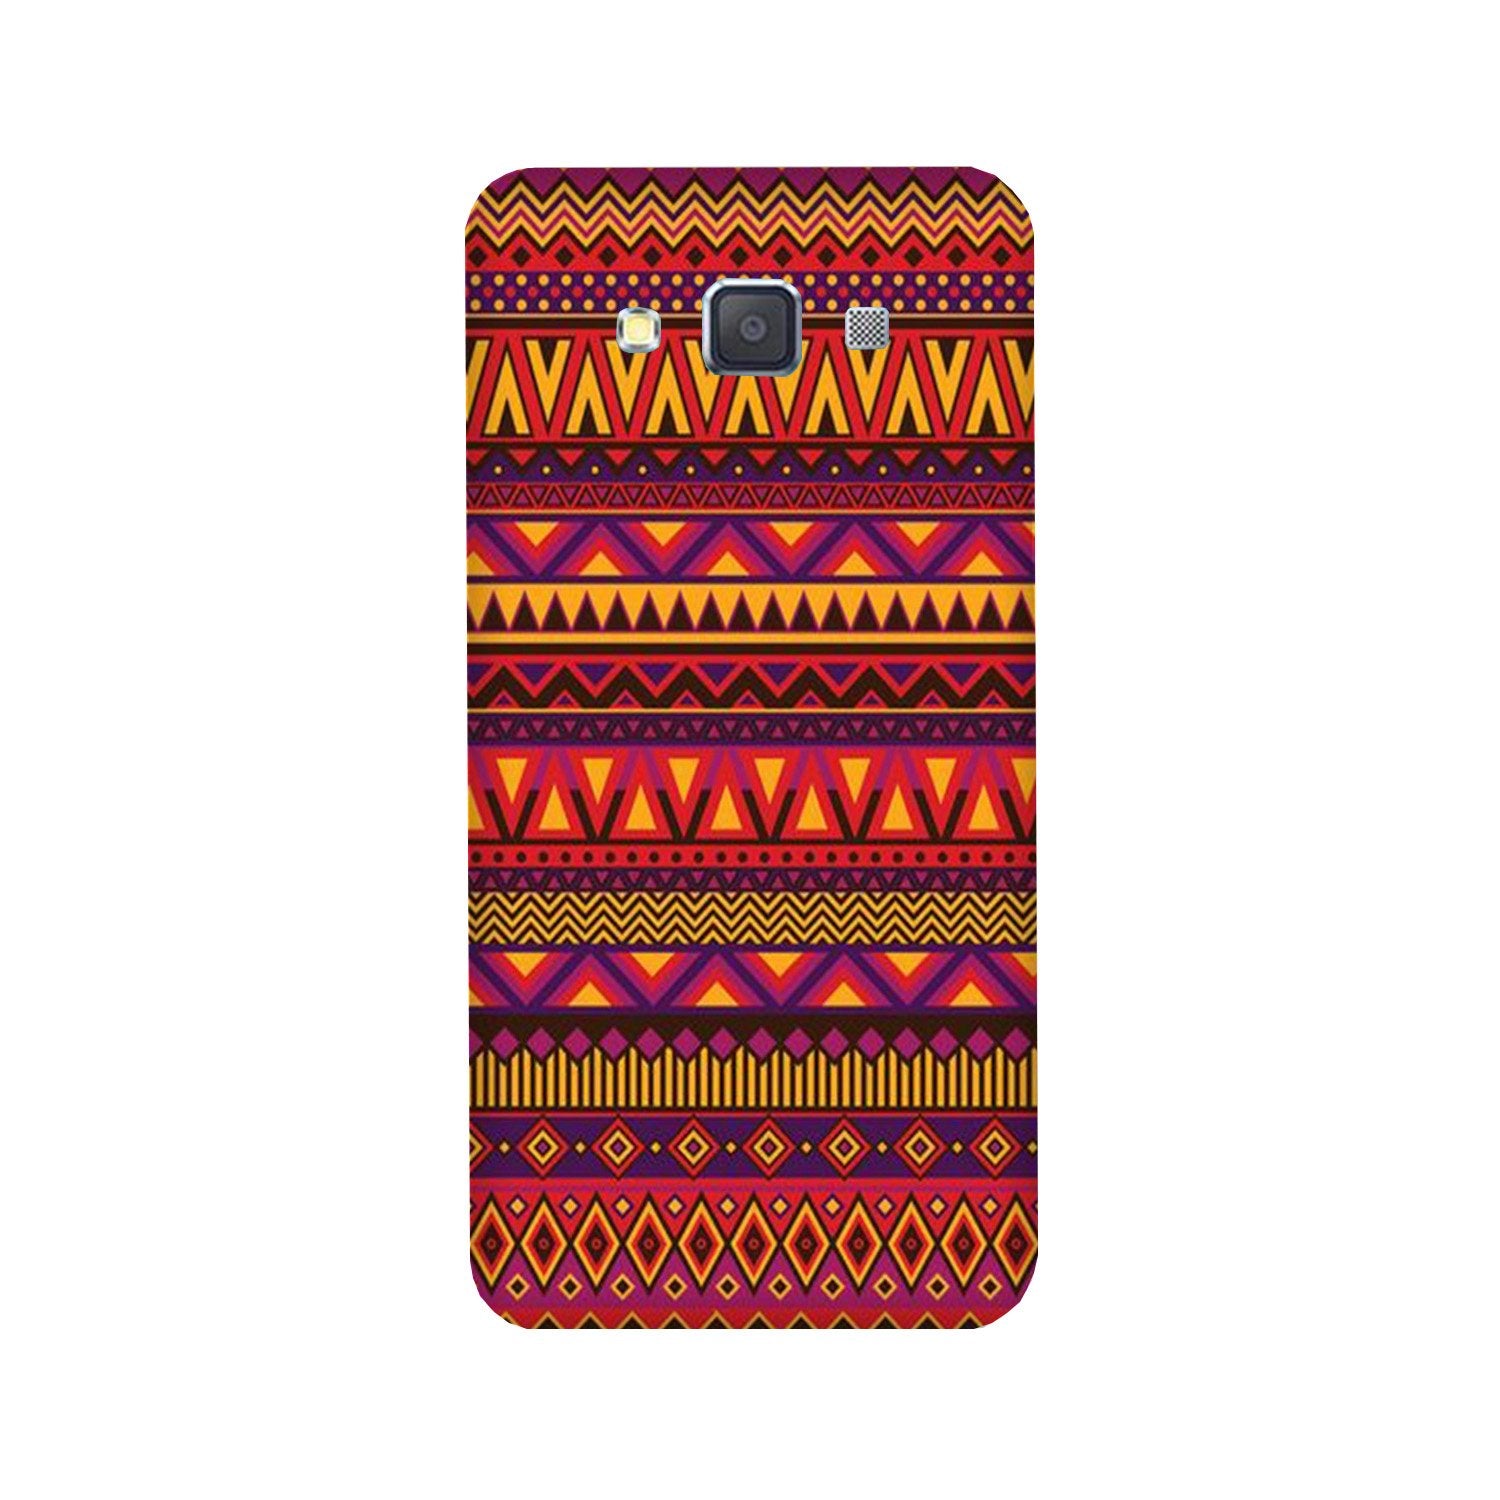 Zigzag line pattern2 Case for Galaxy A3 (2015)